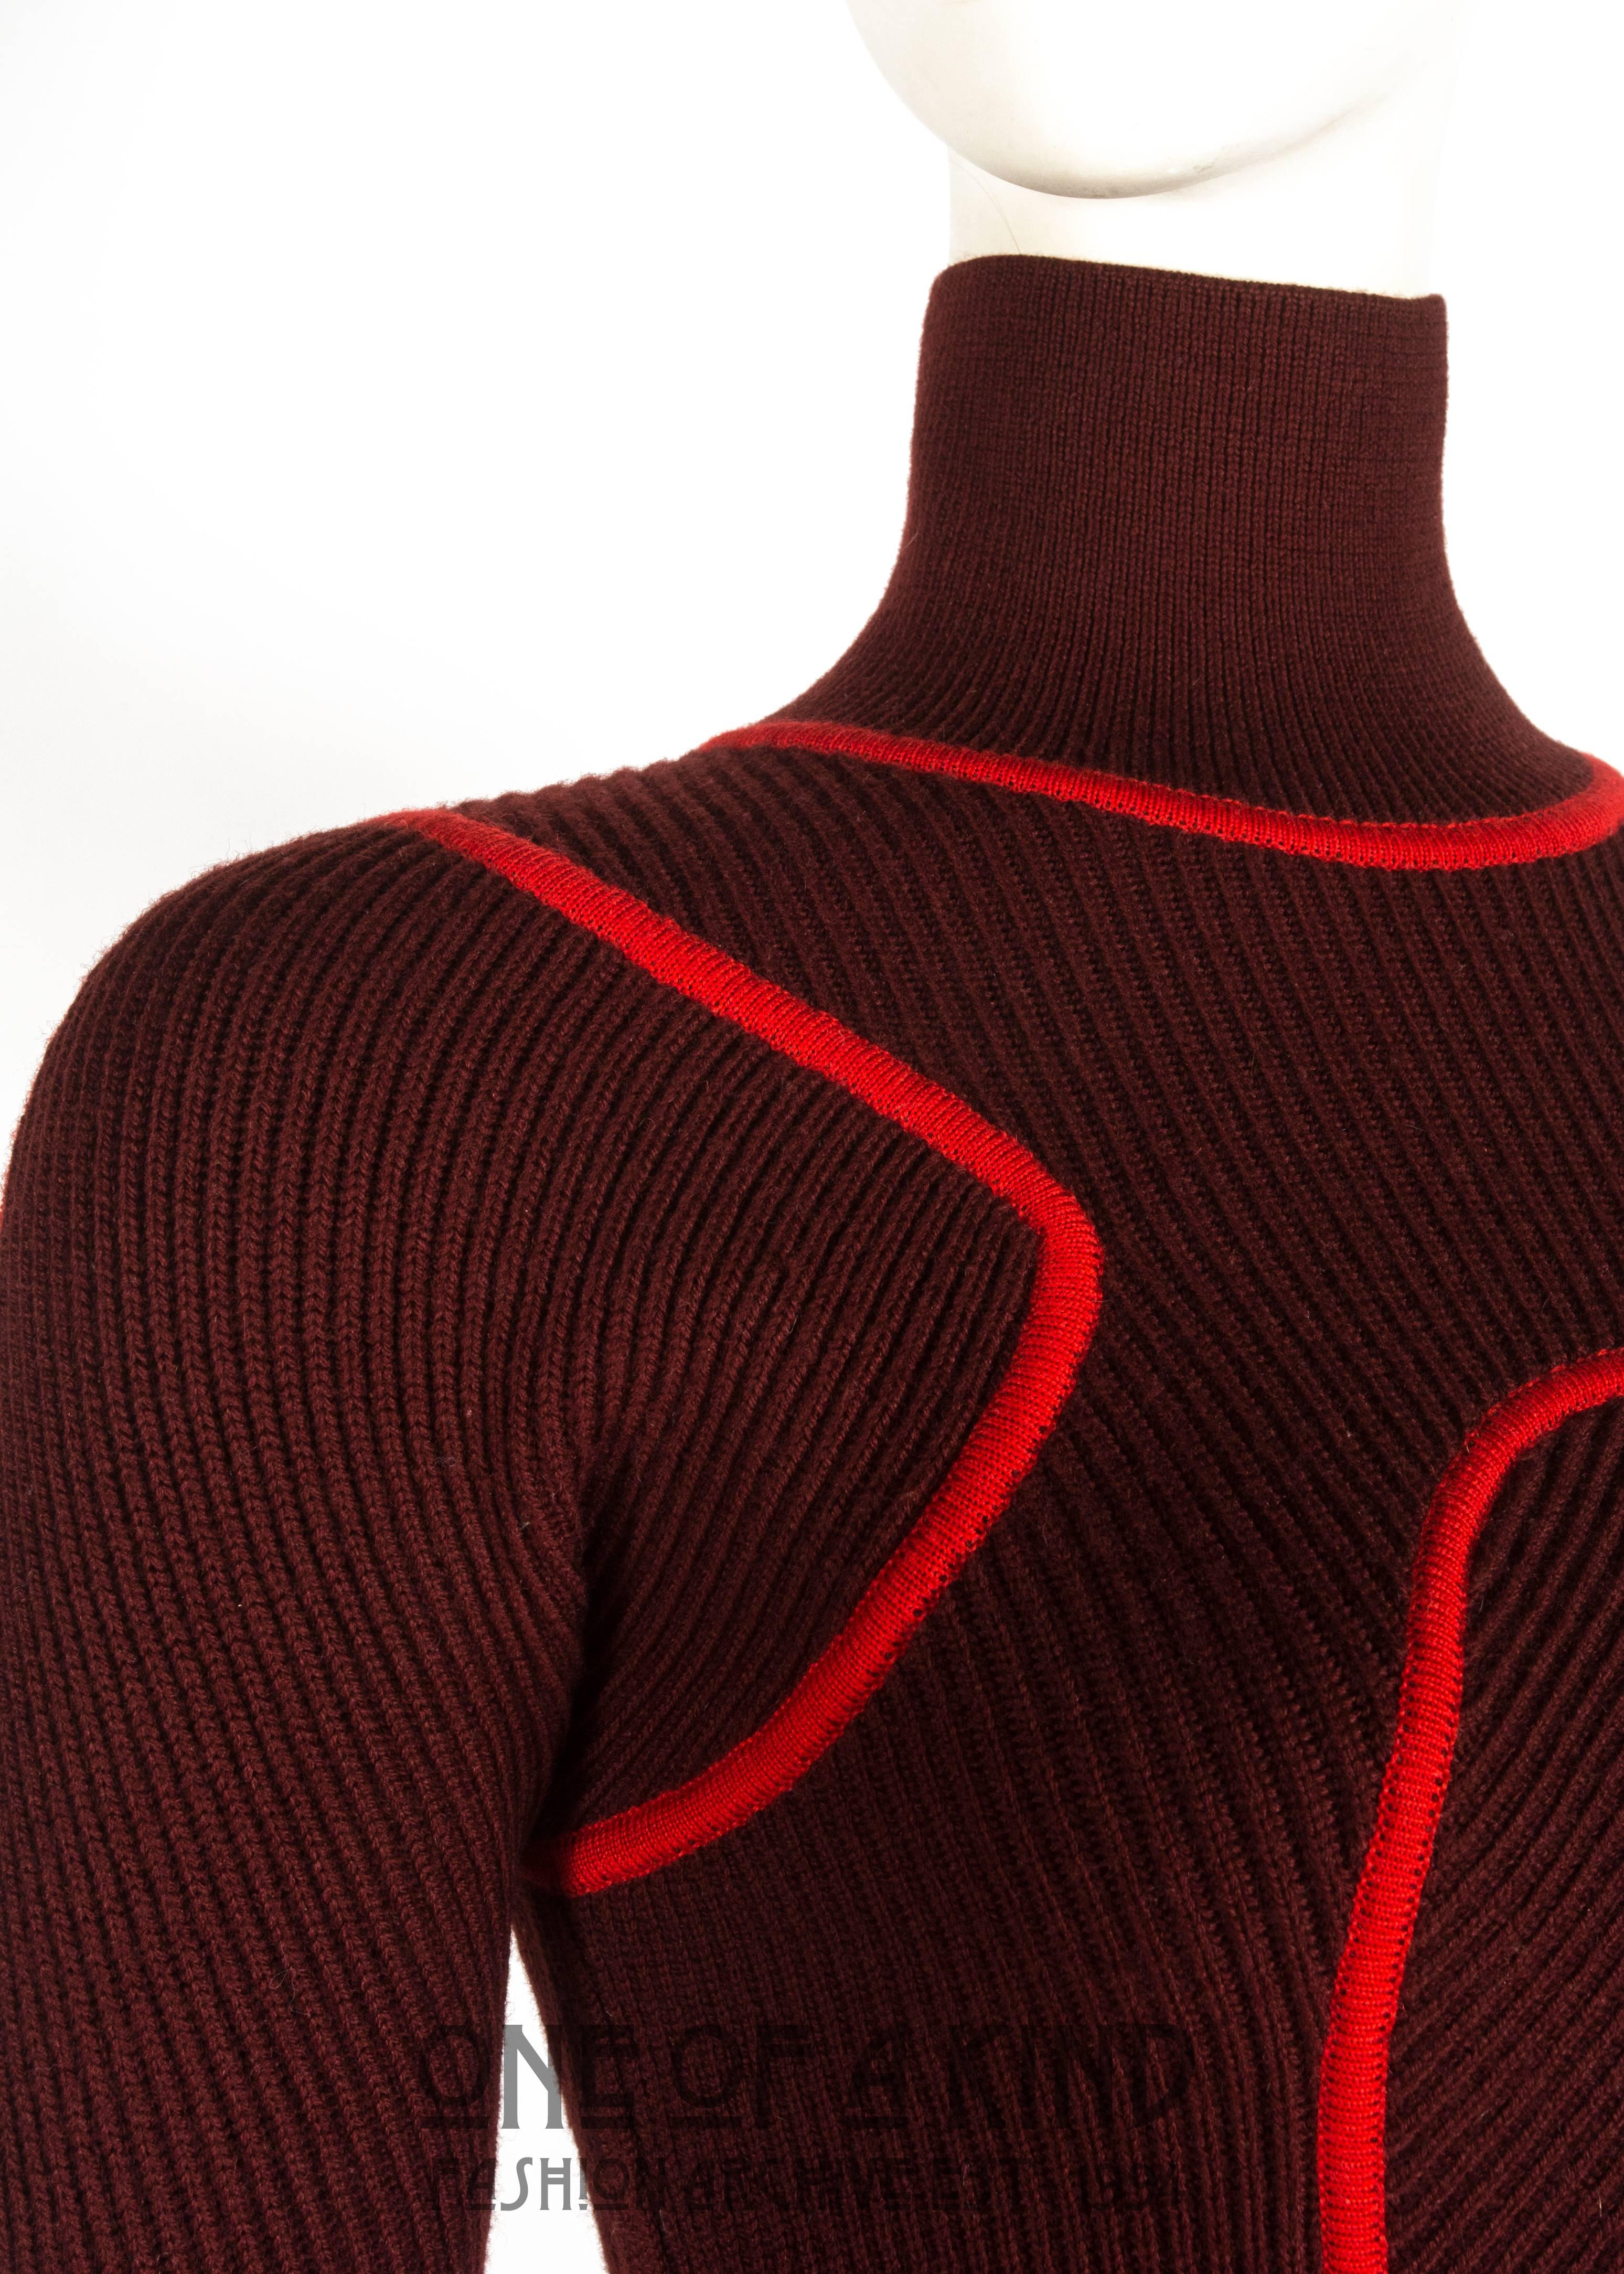 Fendi ribbed knit fitted turtleneck sweater, 1990s 